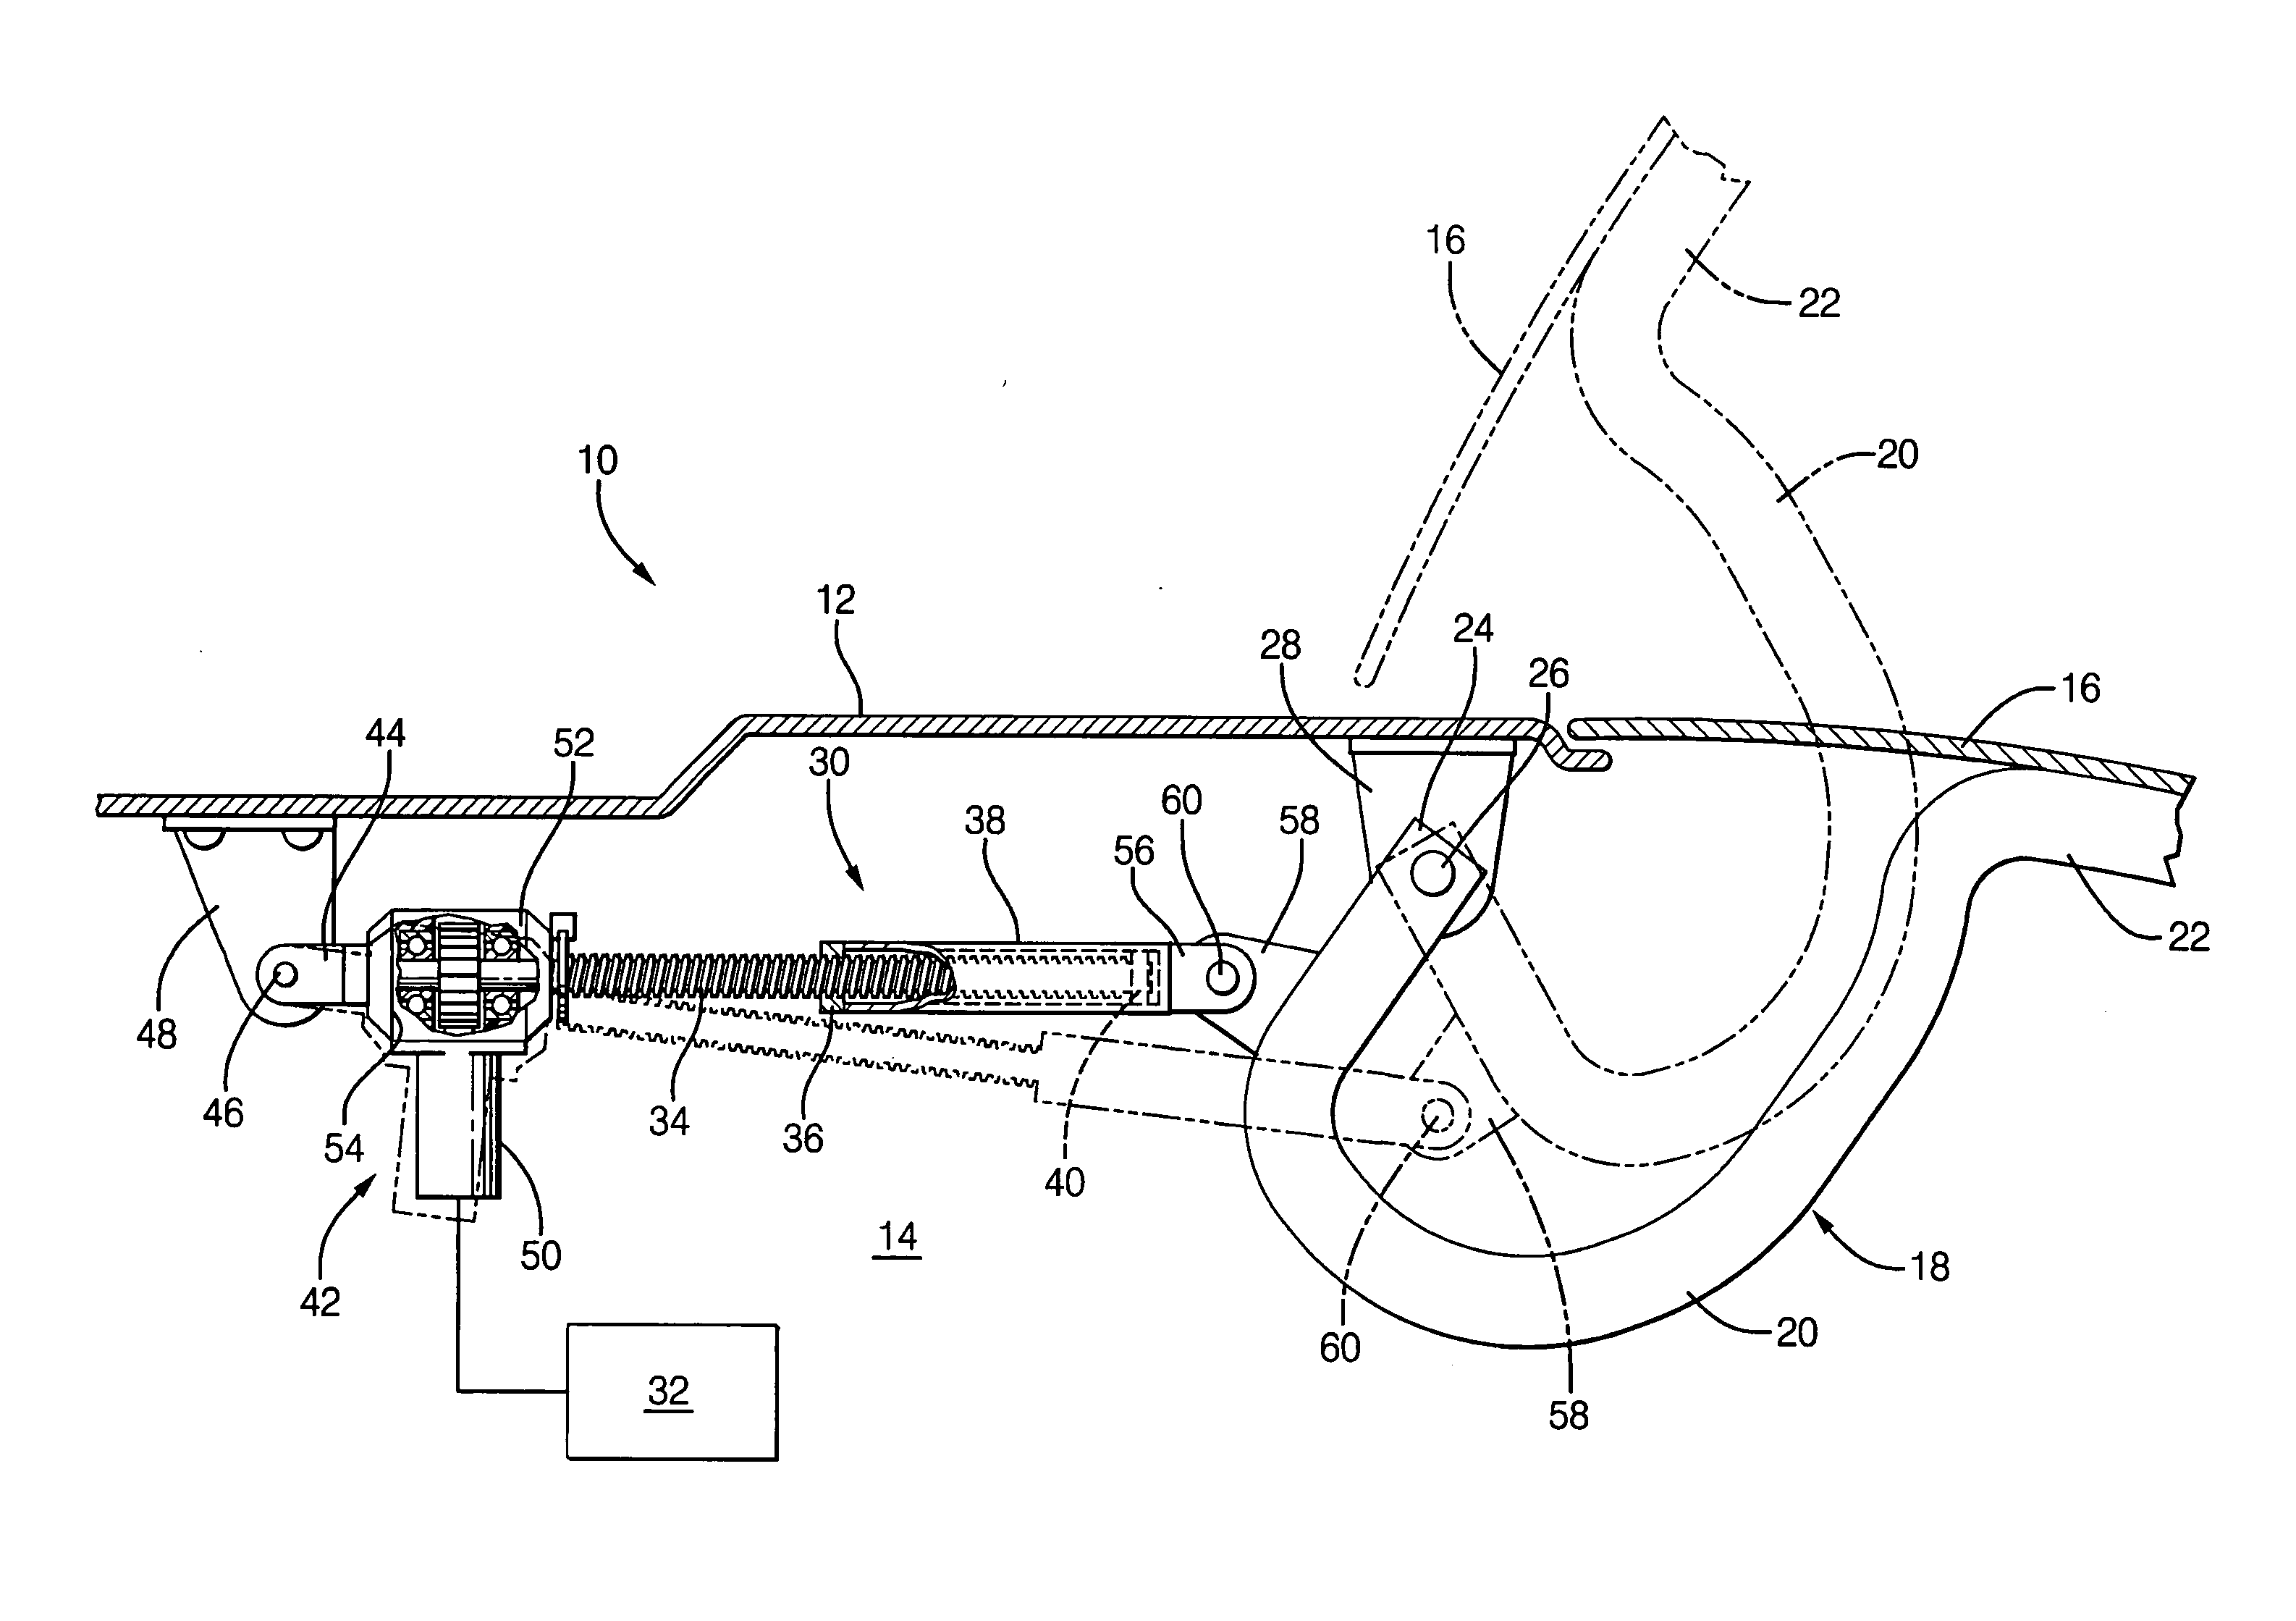 Linear drive actuator for a movable vehicle panel